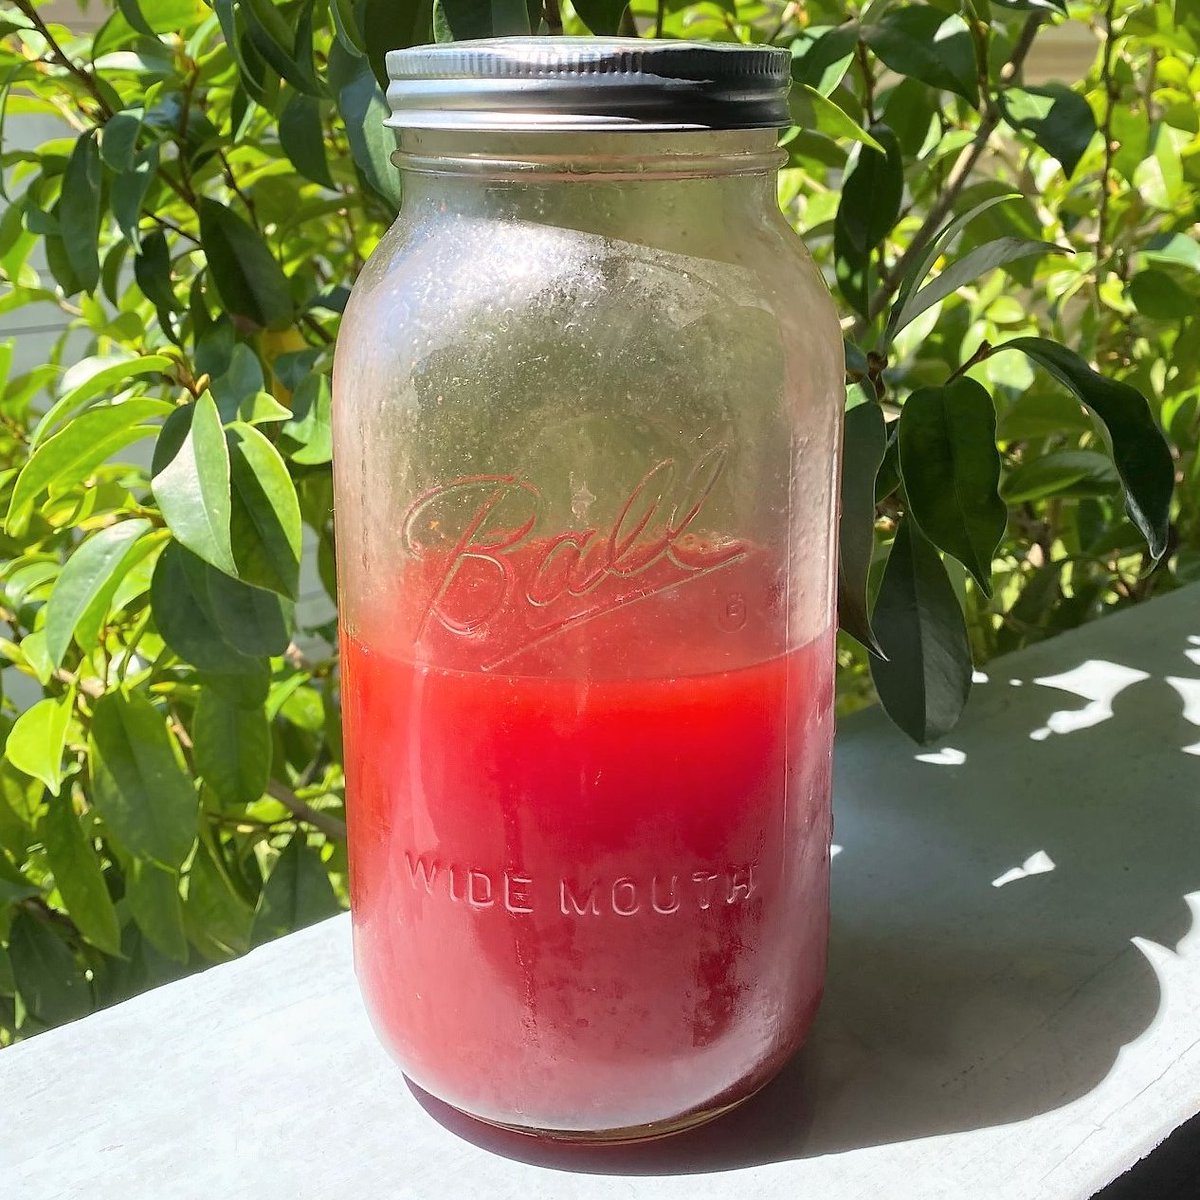 In the spirit of my Totally Analog Pineapple syrup, let’s make Fassionola! It's a Tiki staple in recipes like the Hurricane. There are both red and gold varieties. The red focuses on berry and has been described as similar to Kool-Aid syrup.